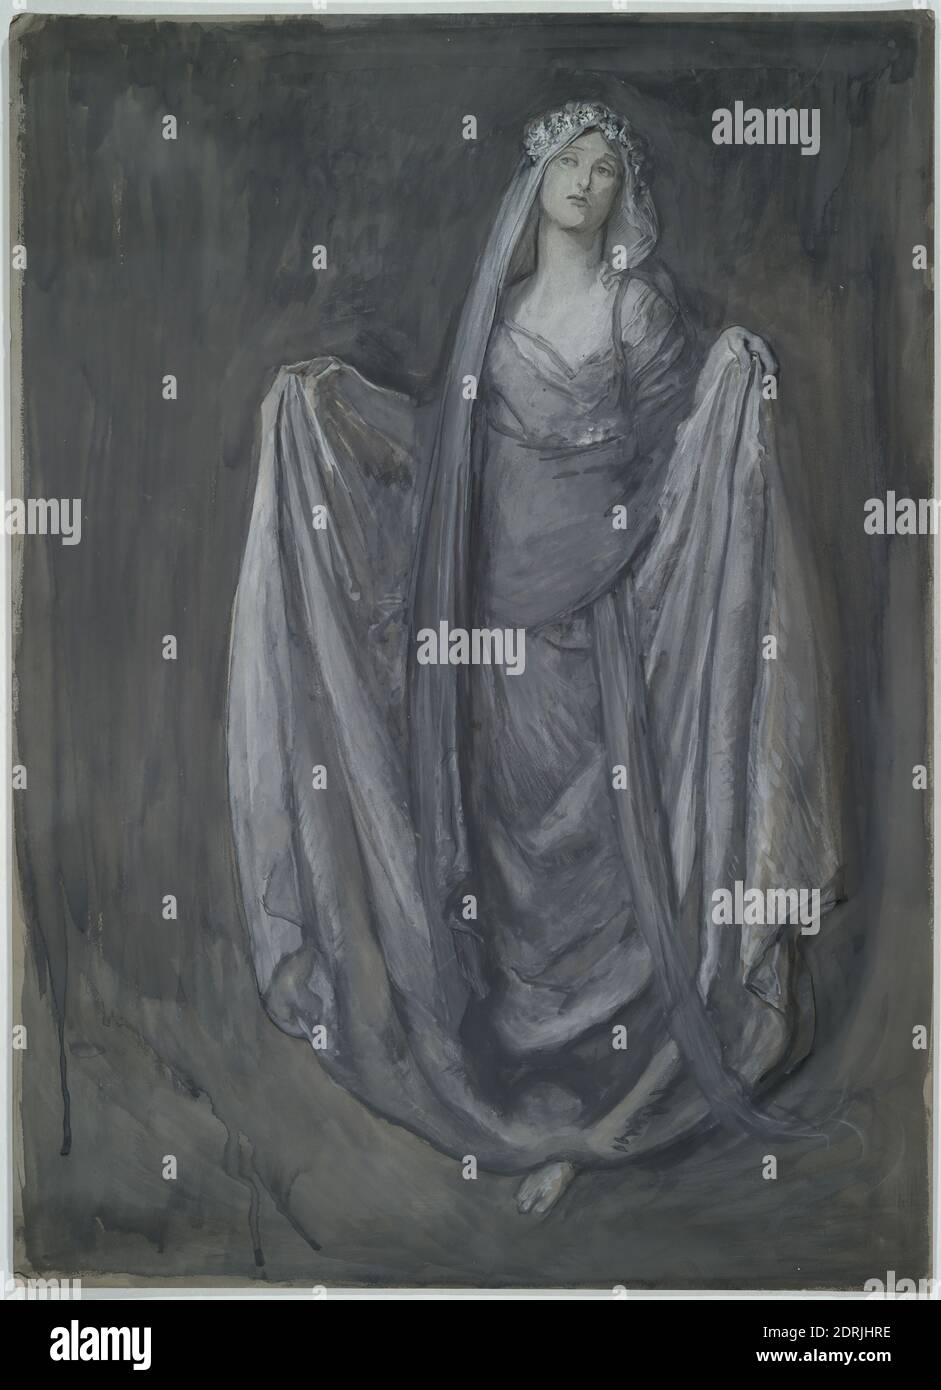 Artist: Edwin Austin Abbey, American, 1852–1911, M.A., 1897, Study for Blanchefleur?, for the Sir Galahad wedded to Blanchefleur mural in the Quest for the Holy Grail cycle at the Boston Public Library, 19th century, Chalk, Made in United States, American, 19th century, Works on Paper - Drawings and Watercolors Stock Photo